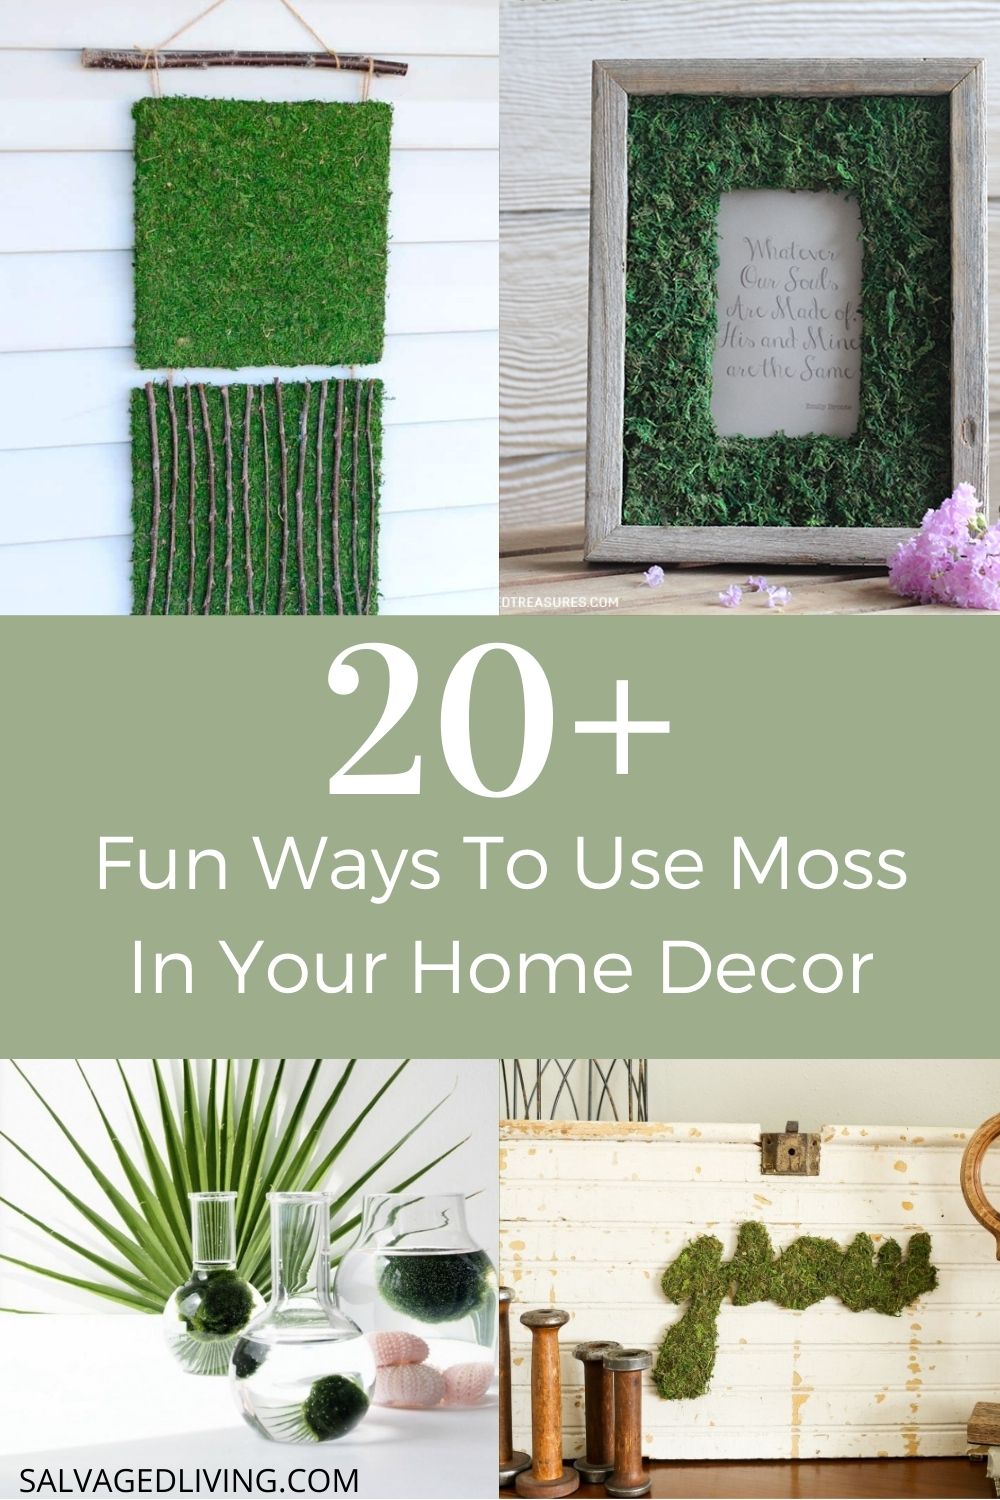 DIY Moss Wall Decor for Your Home